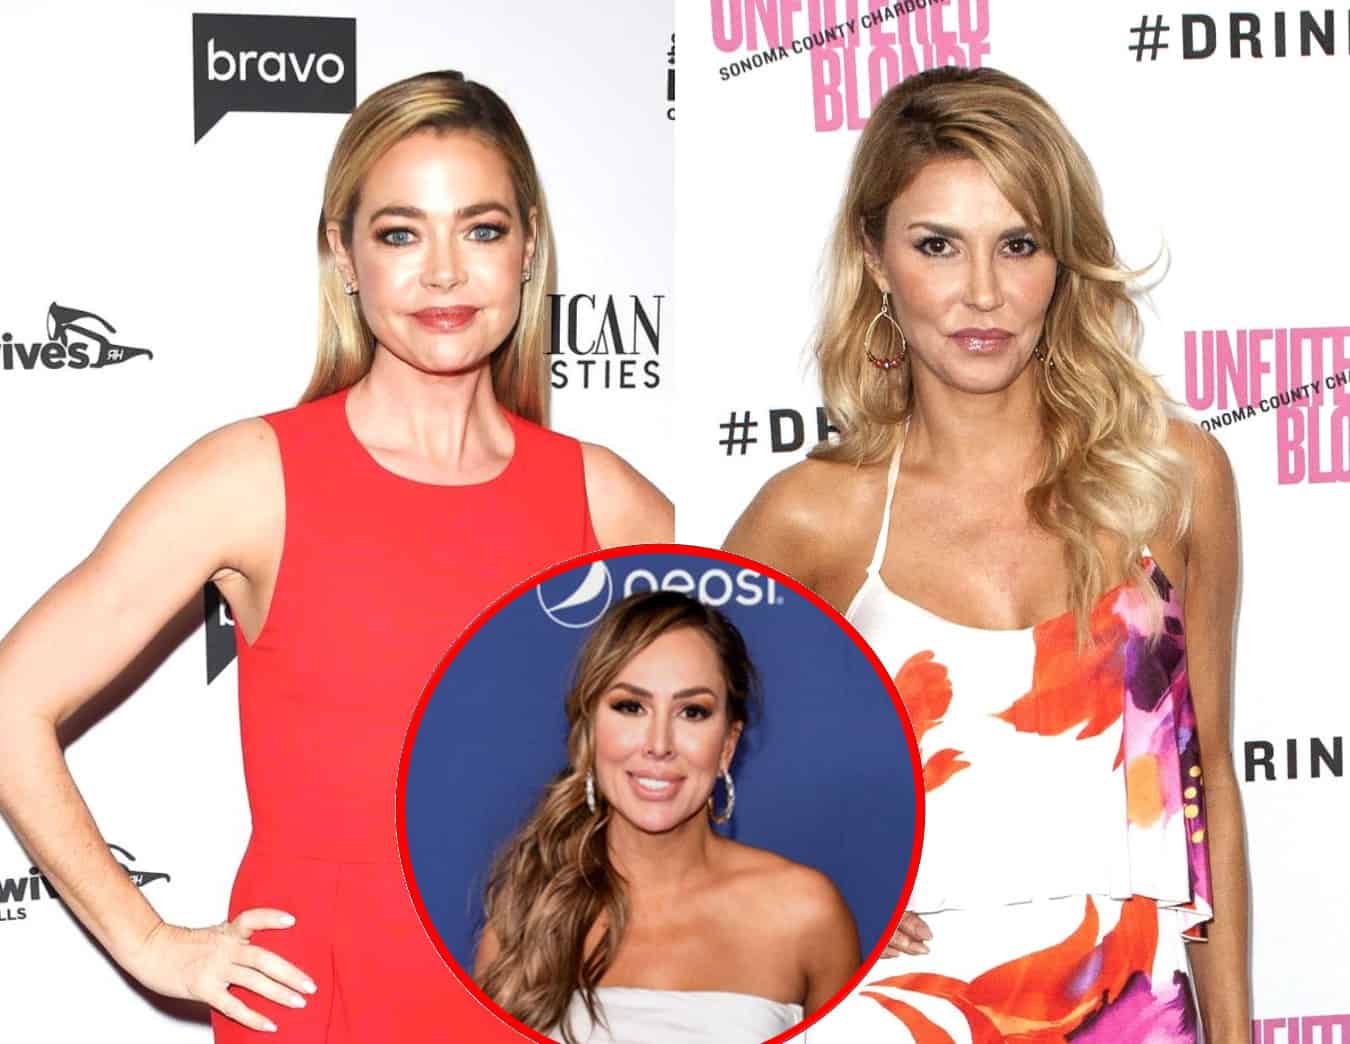 Is This the Reason Brandi Glanville and Denise Richards are Feuding? Check Out the Wild Rumor About the RHOBH Stars Plus Kelly Dodd's Reaction